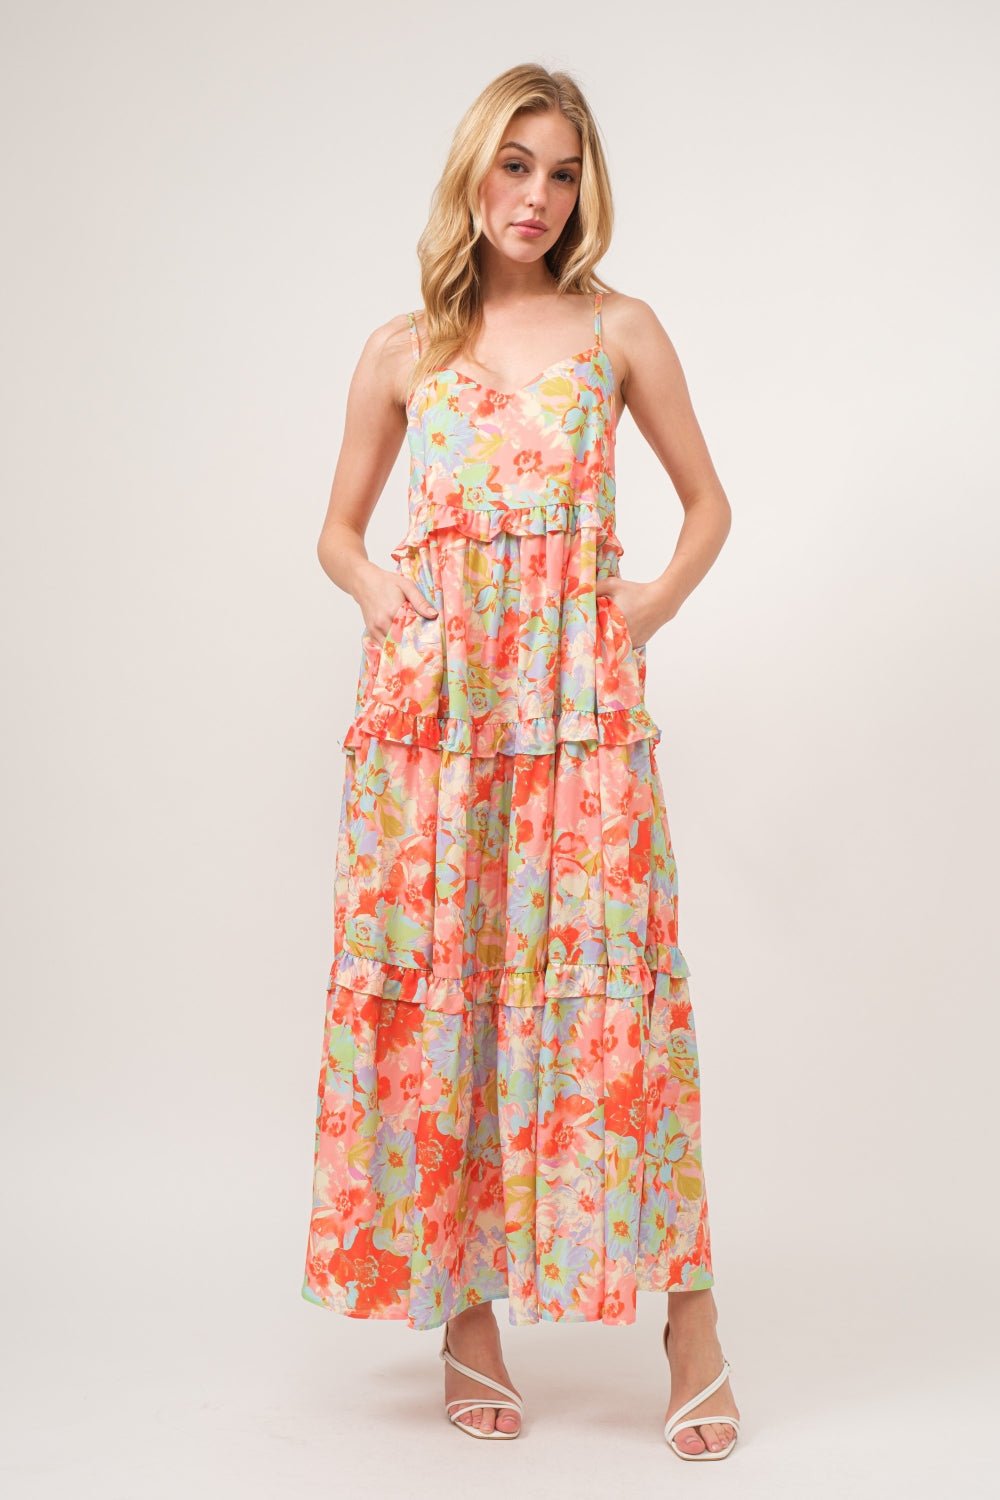 Floral Ruffled Tiered Maxi Cami DressMaxi DressAnd the Why